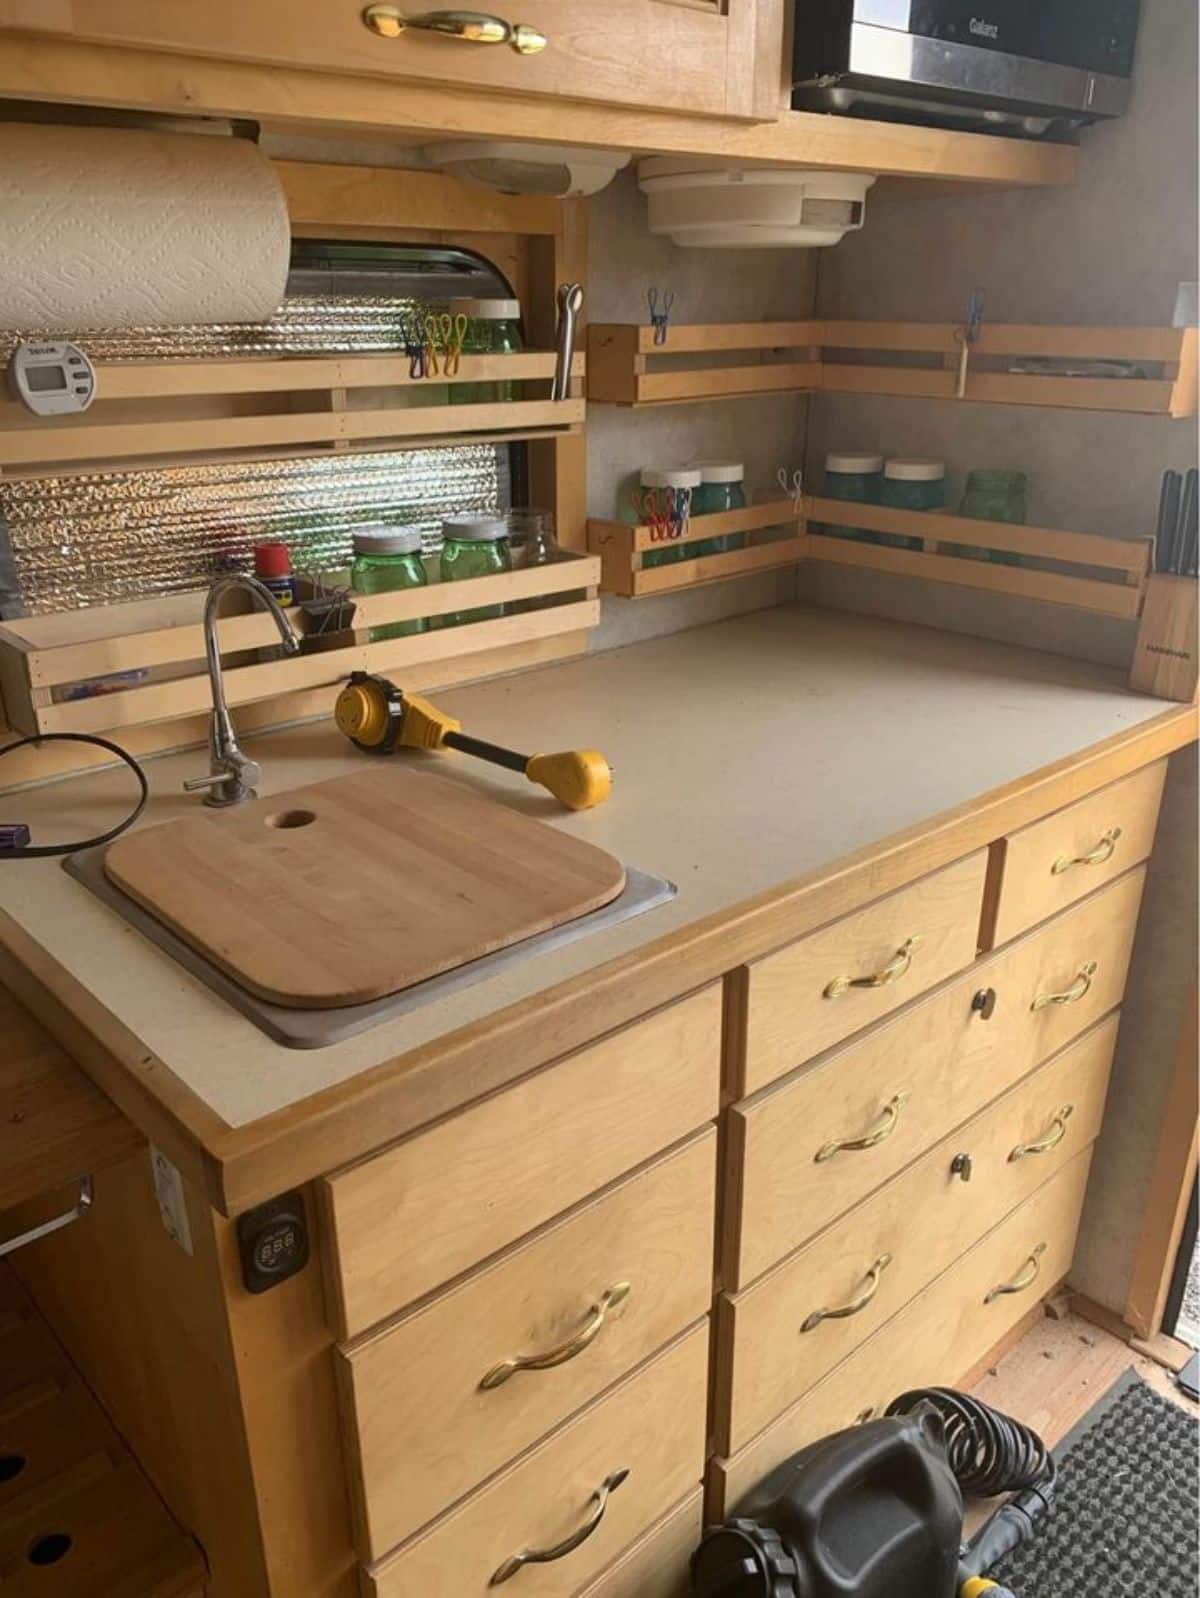 Kitchen area of Super Tiny Home on wheels has a lot of storage spaces